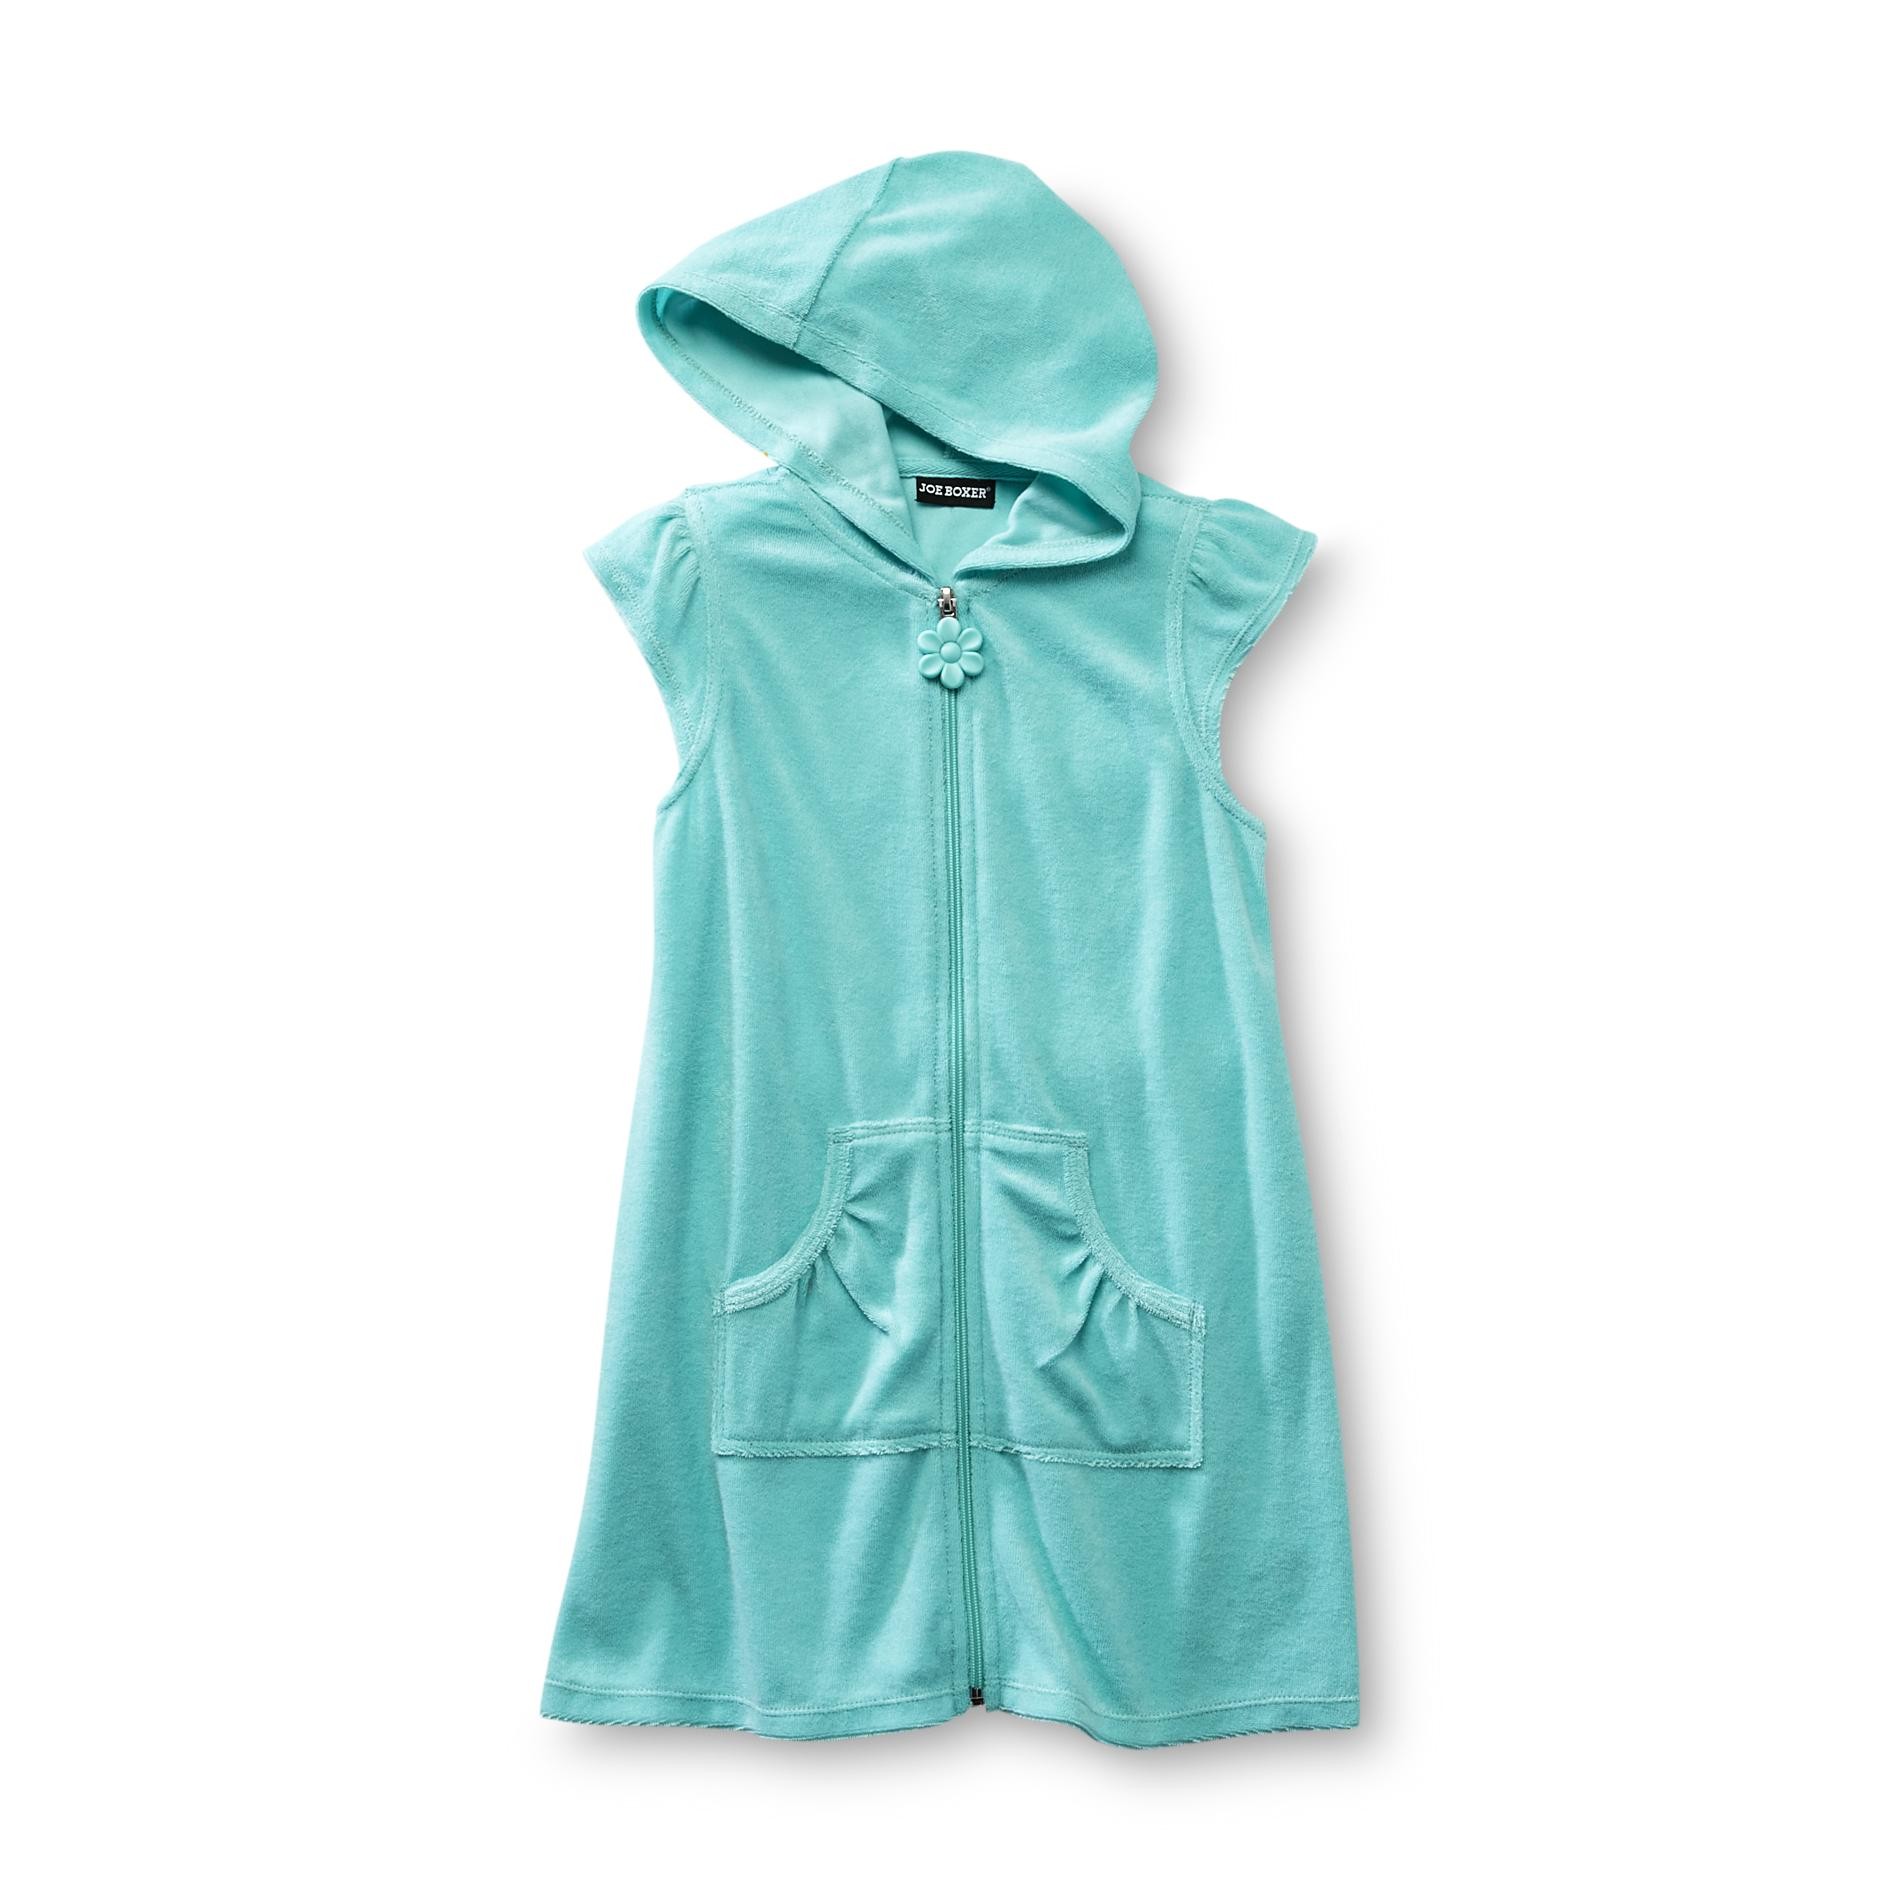 Joe Boxer Girl's Terry Cloth Cover-Up - Flower